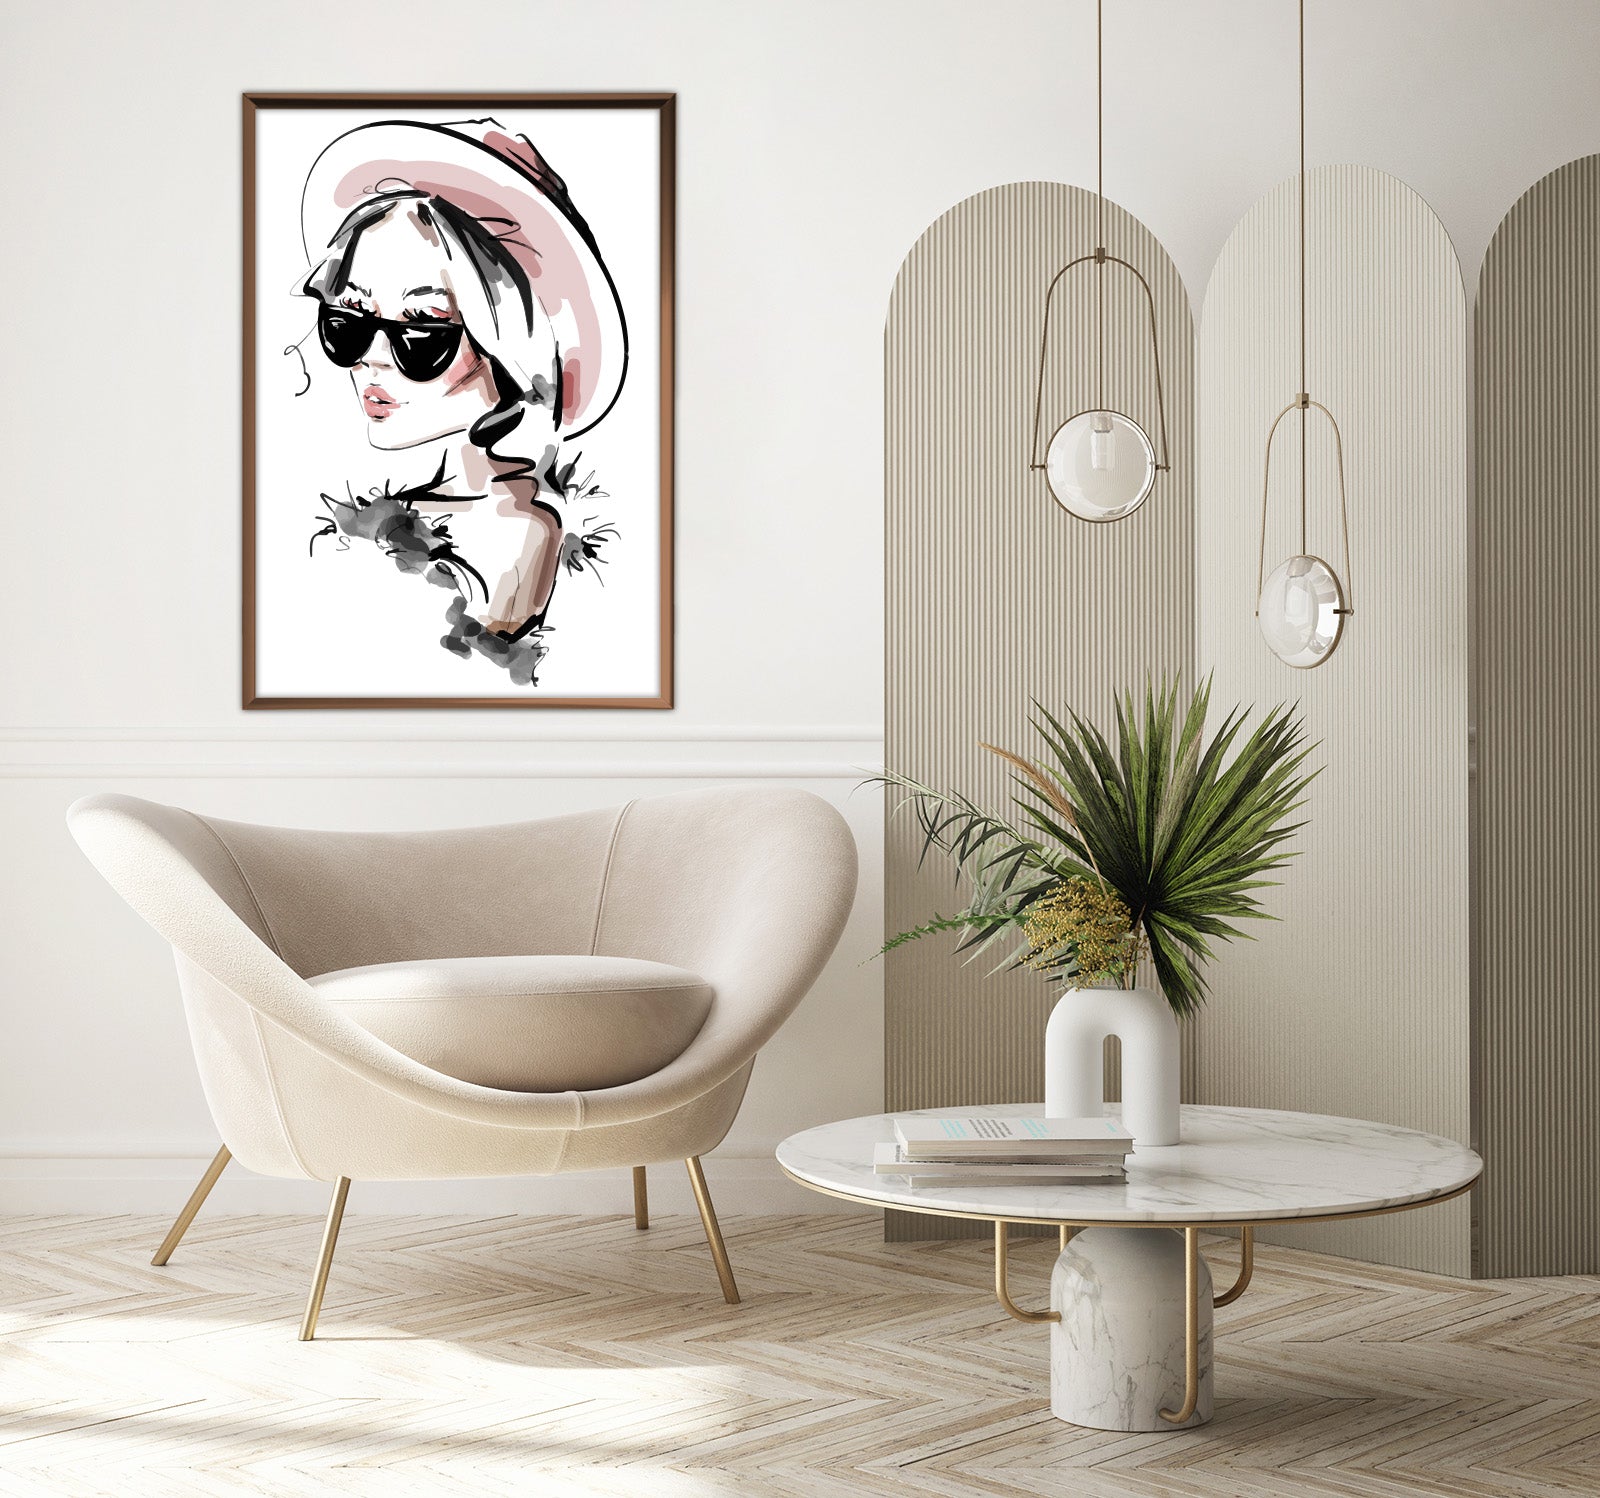 "Canvas Wall Art (A Woman Wearing Sunglasses and a Hat) "